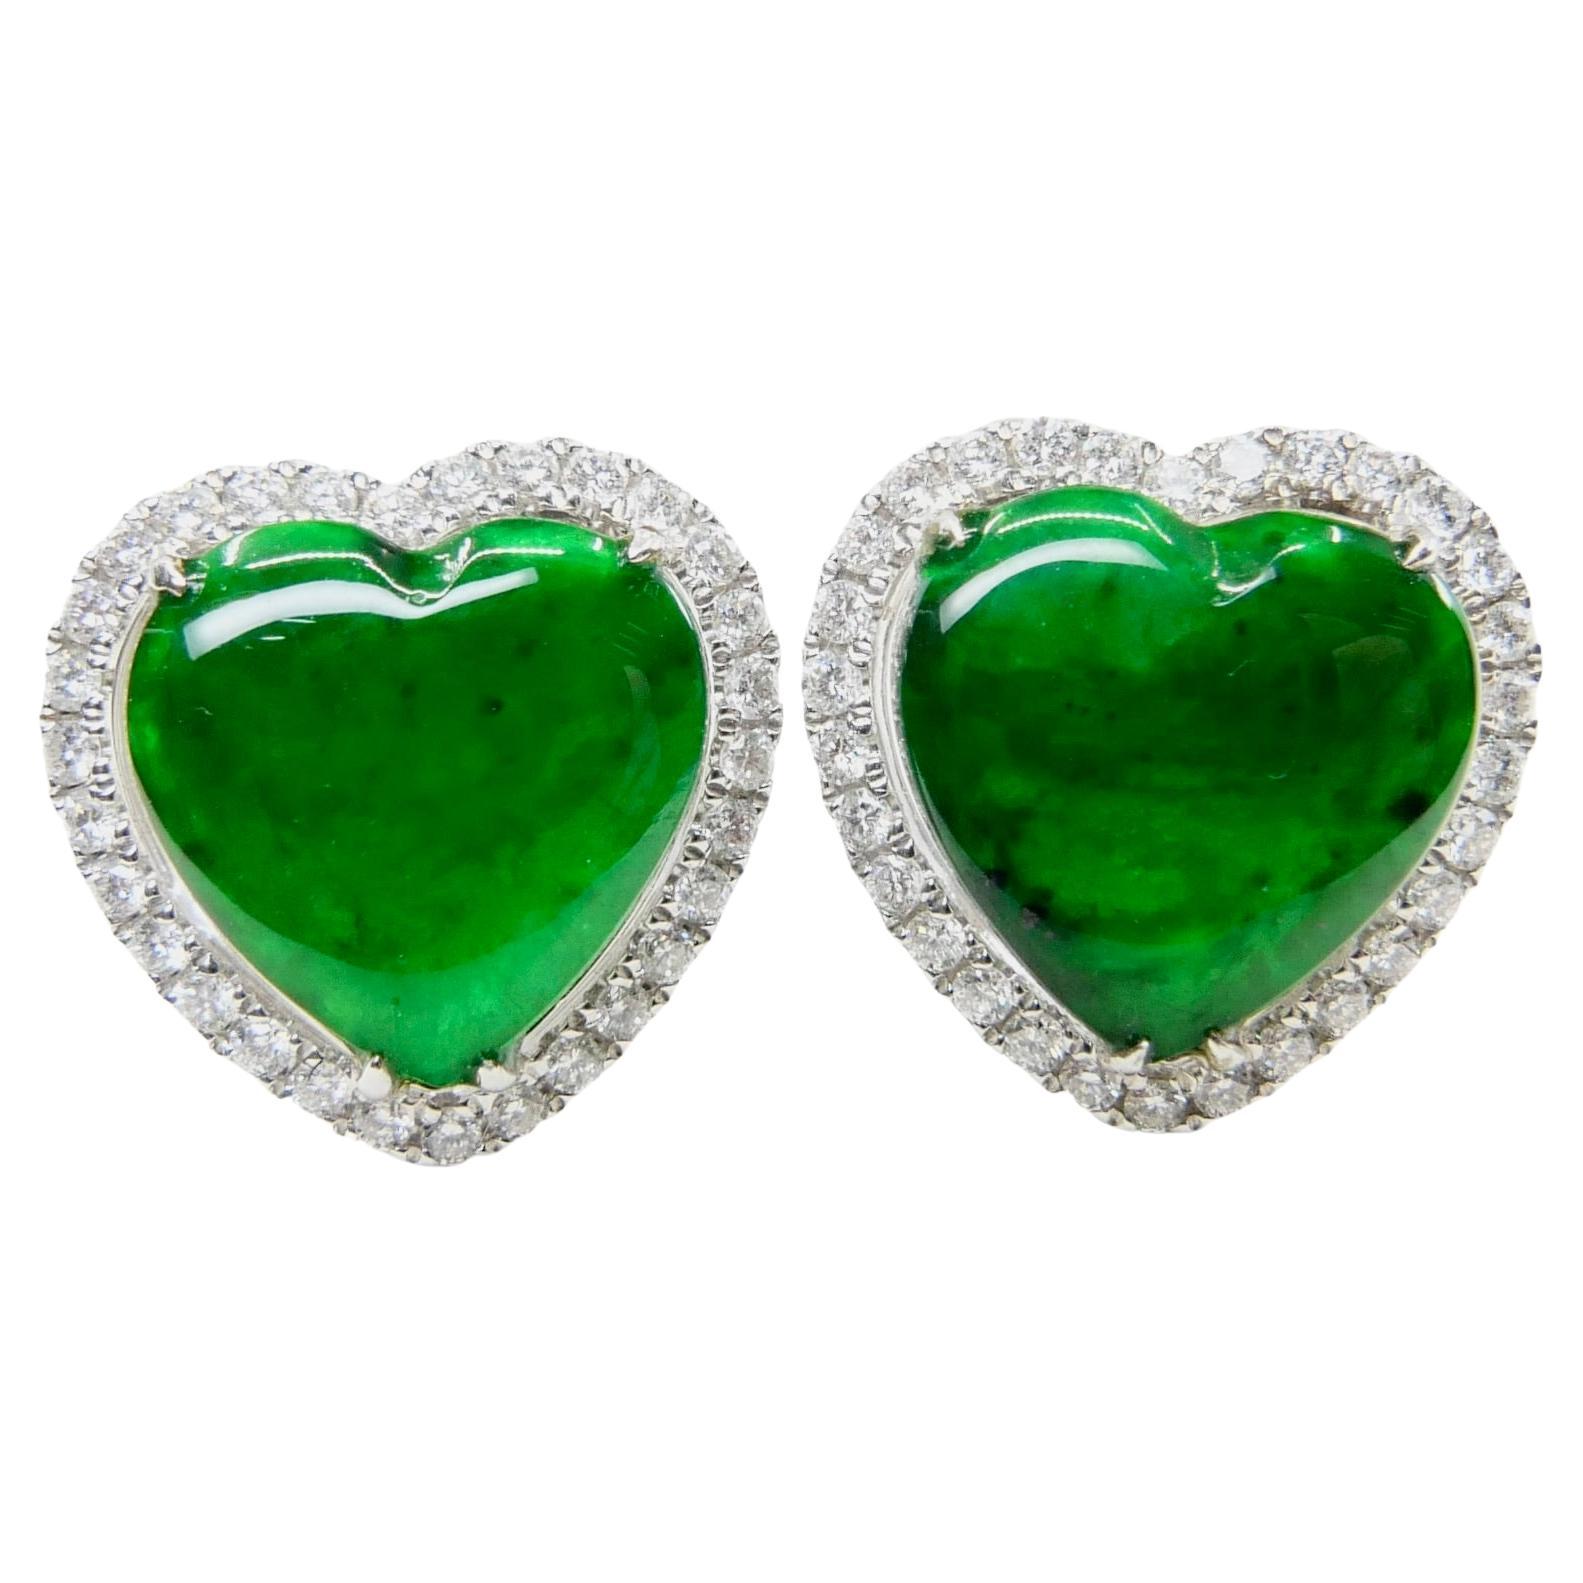 Women's Certified Type A Jadeite and Diamond Earrings Imperial Jade, Spinach Green Color